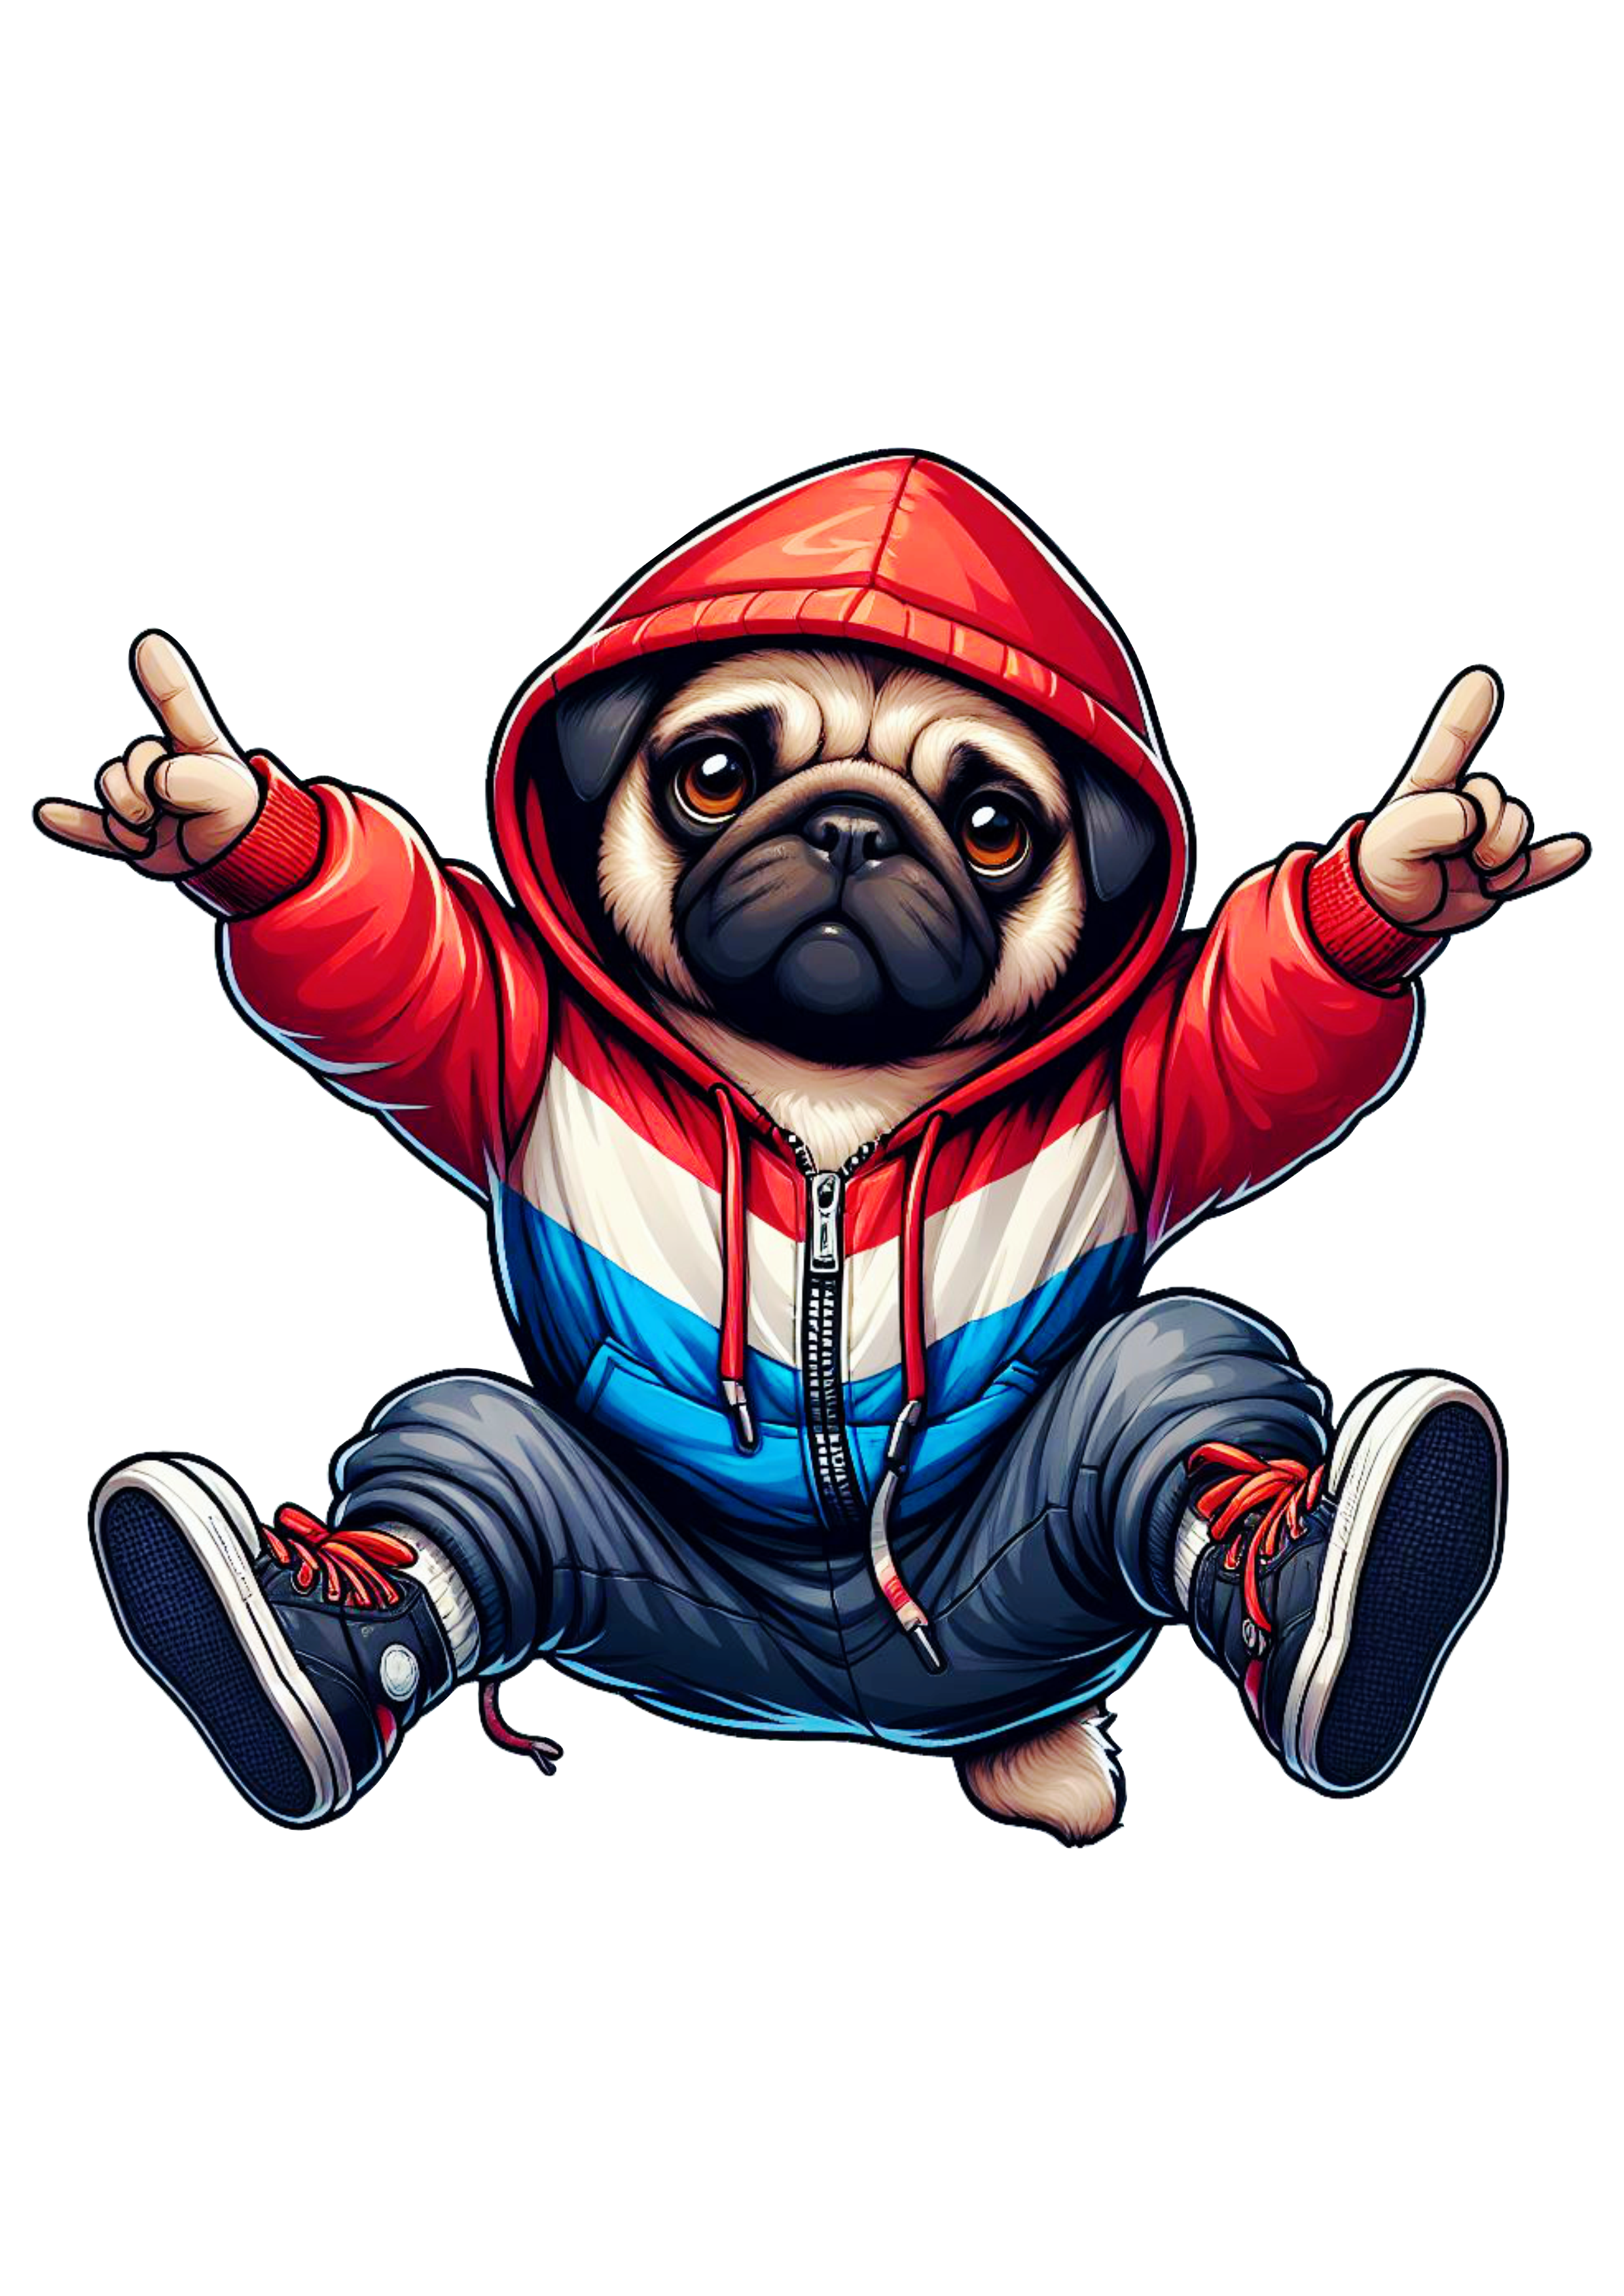 Cute doggo png pug dancing Breakdance transparent background clipart vector illustration power movie